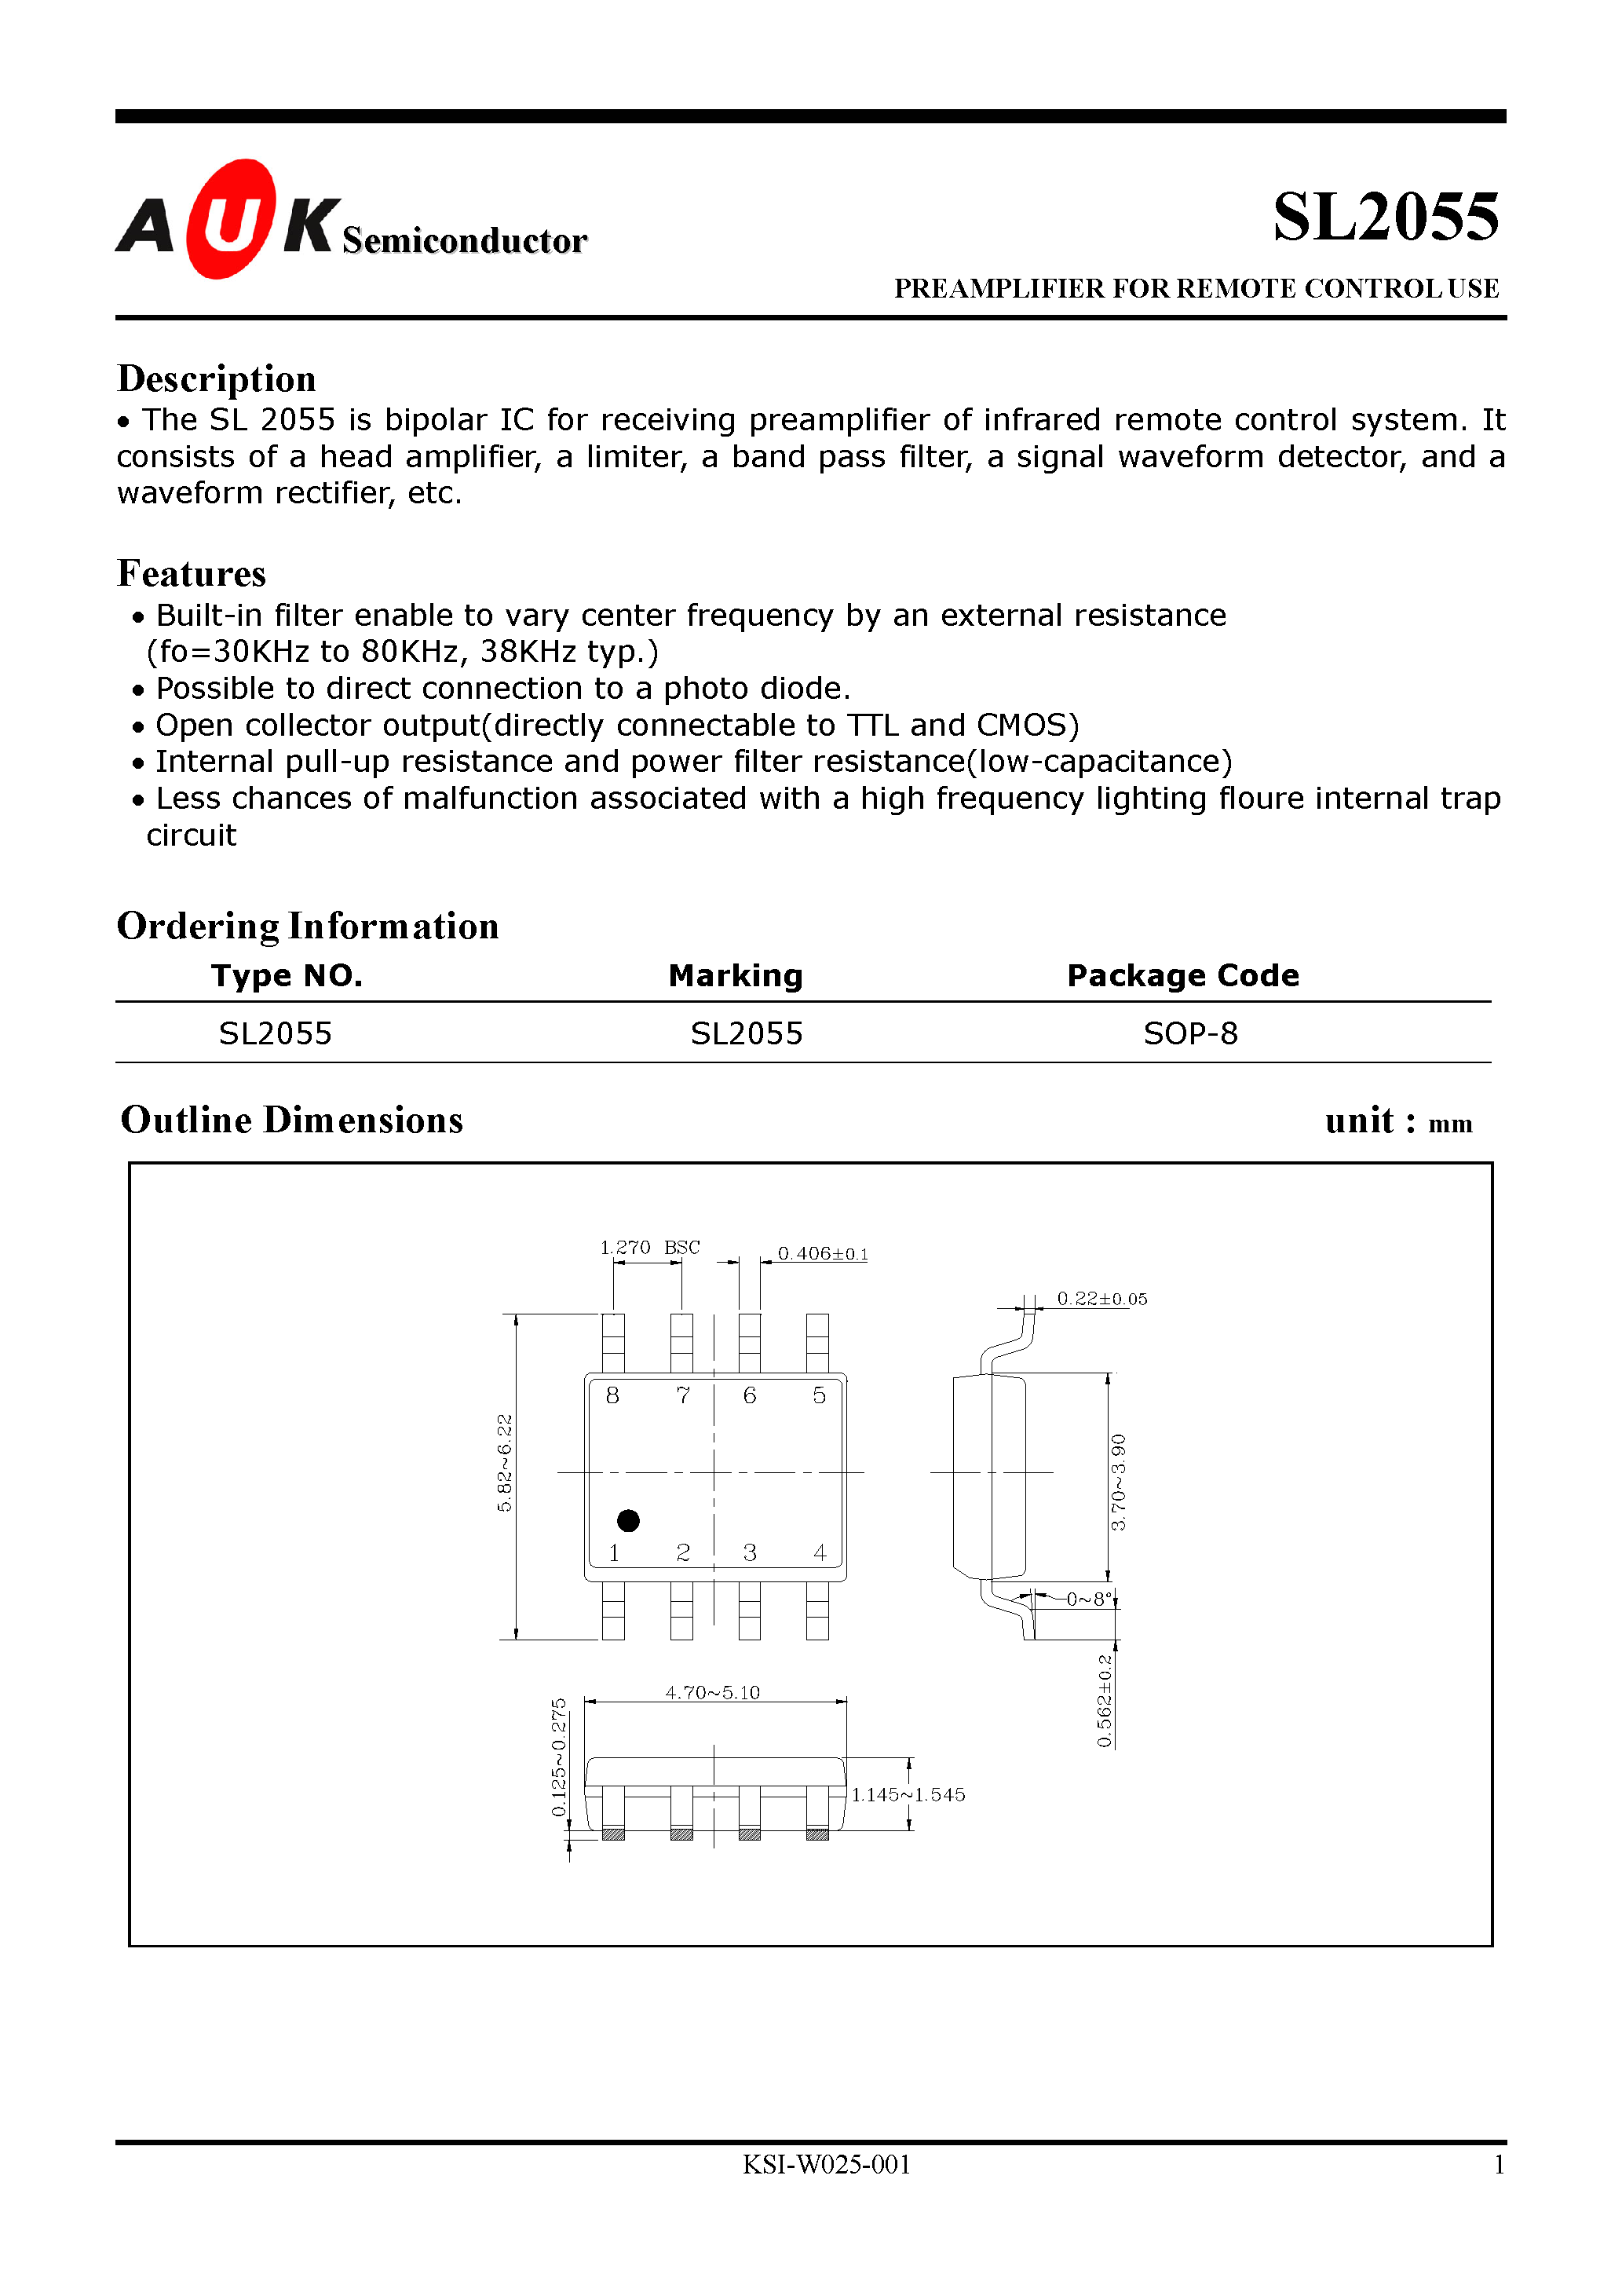 Datasheet SL2055 - PREAMPLIFIER FOR REMOTE CONTROL USE page 1